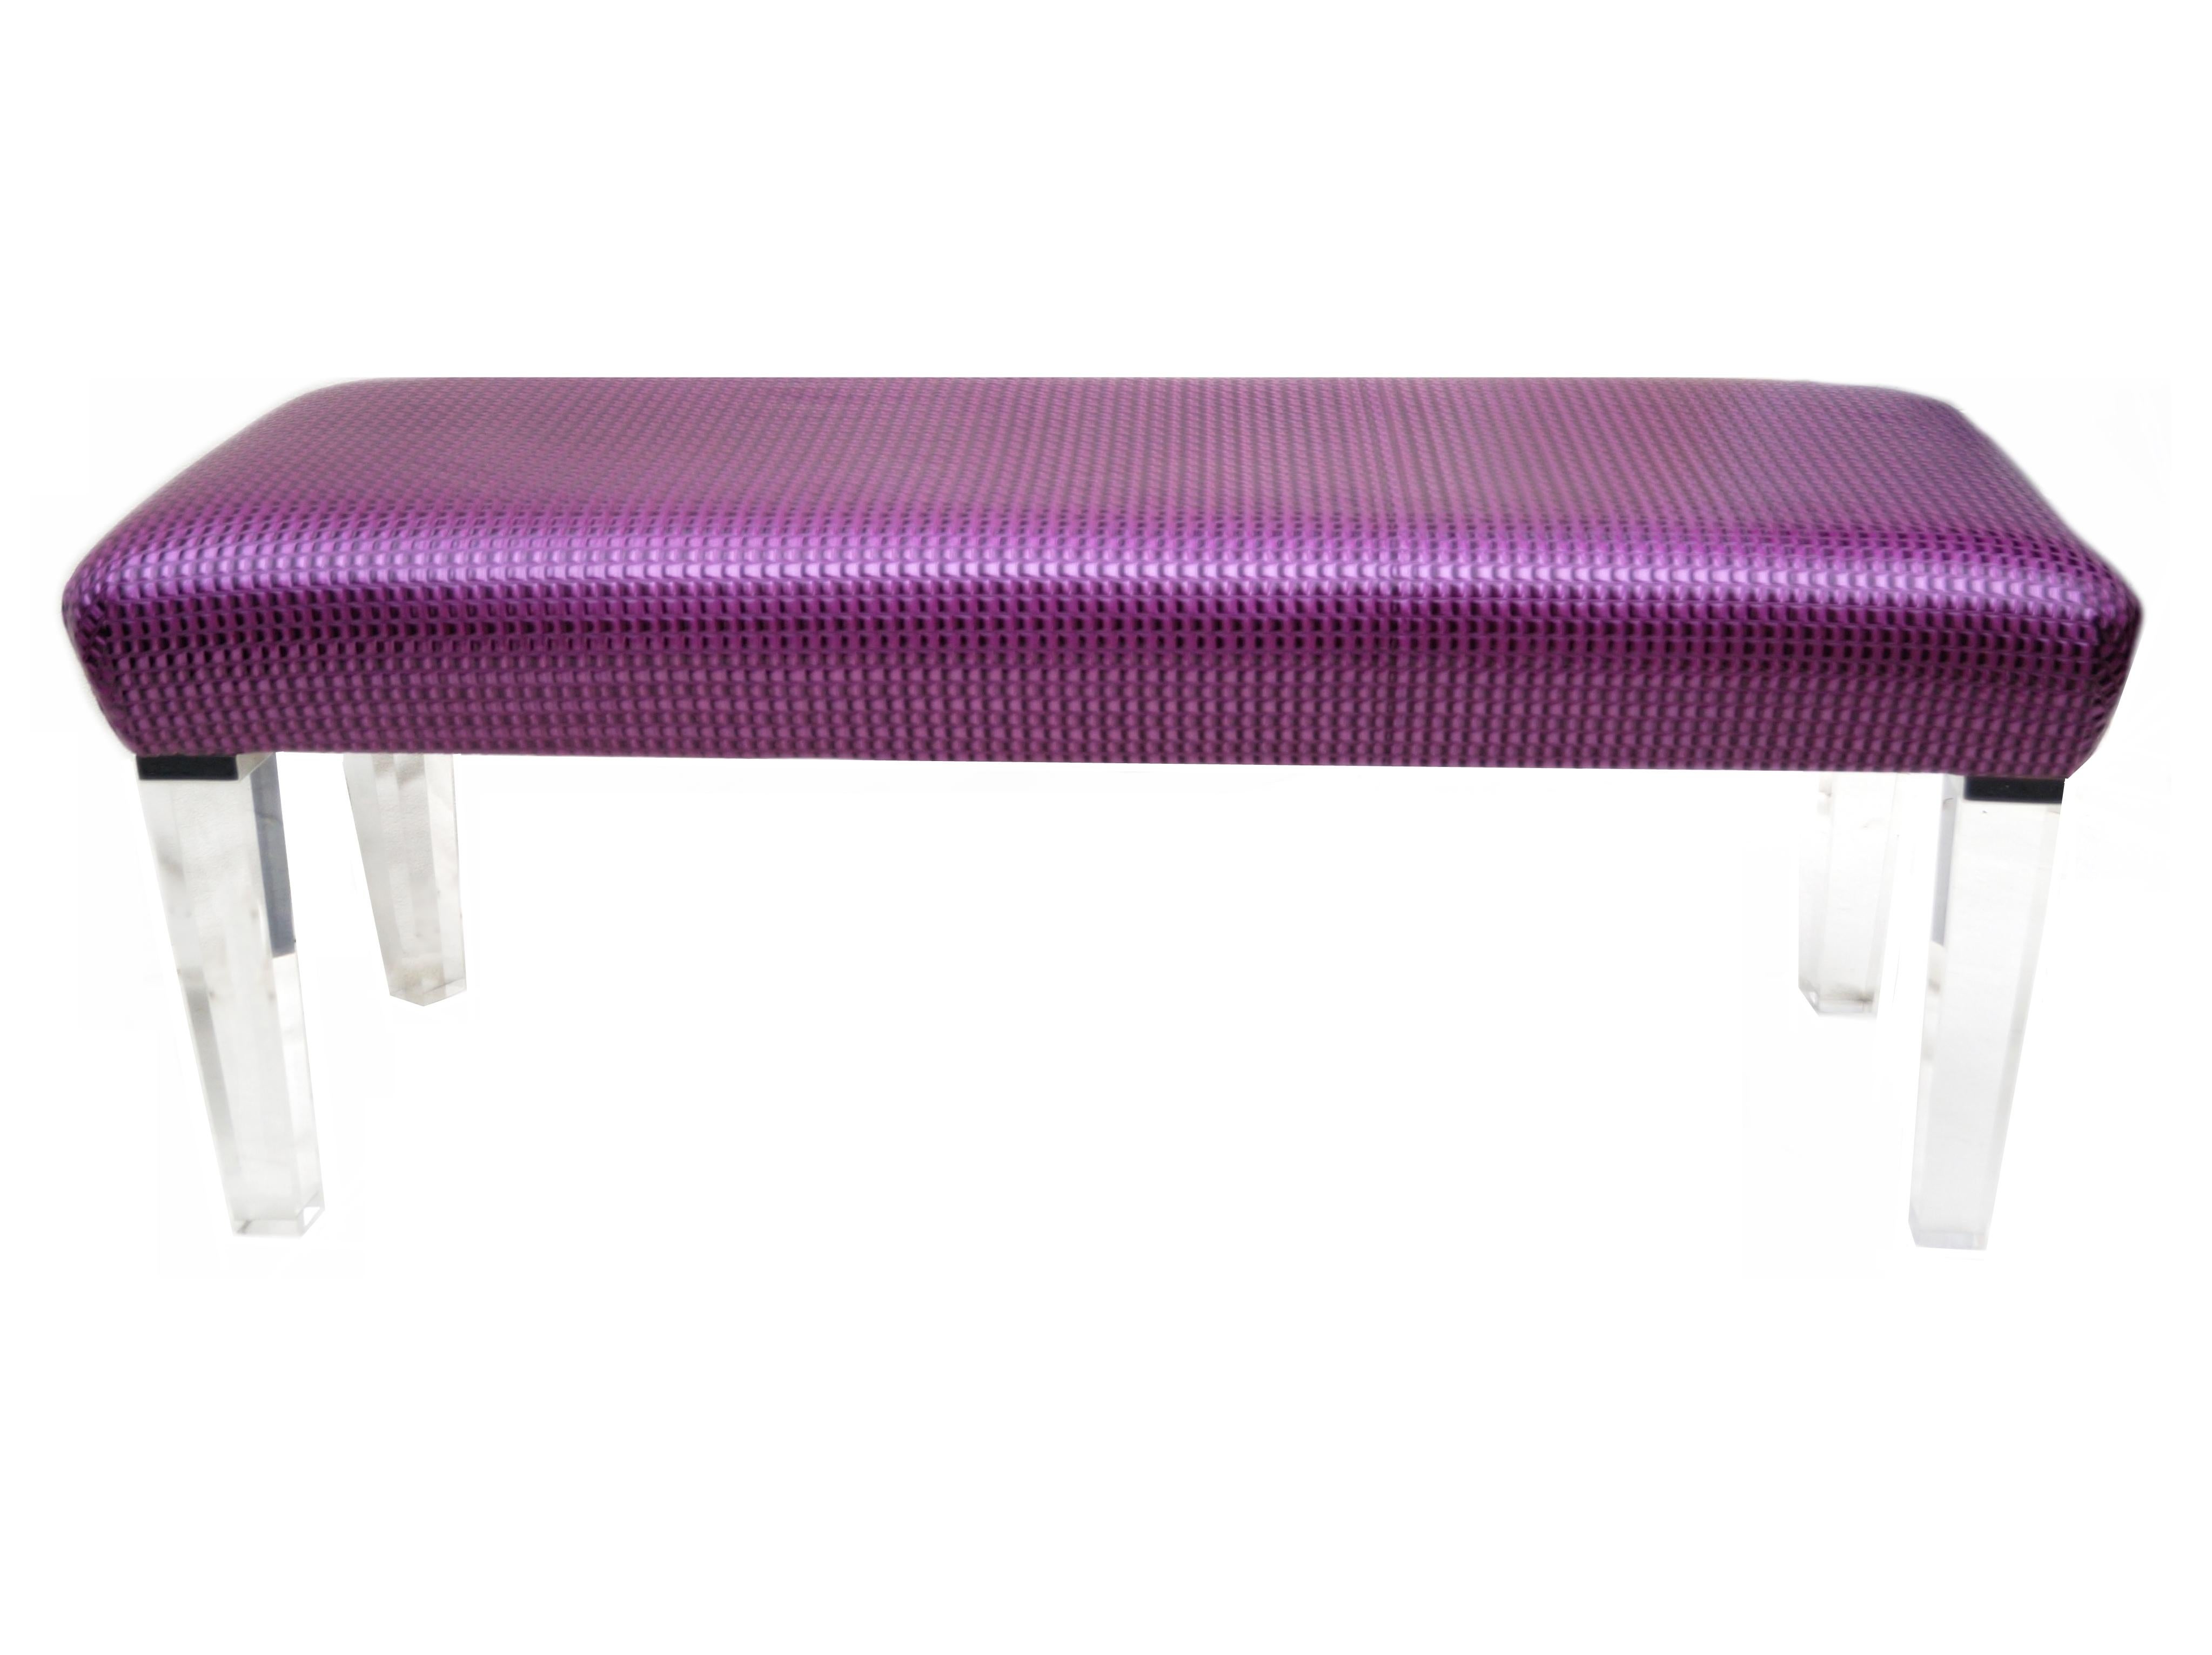 Modern Lucite long stool bench. Lucite legs with chrome detail at top of legs beneath the seat.